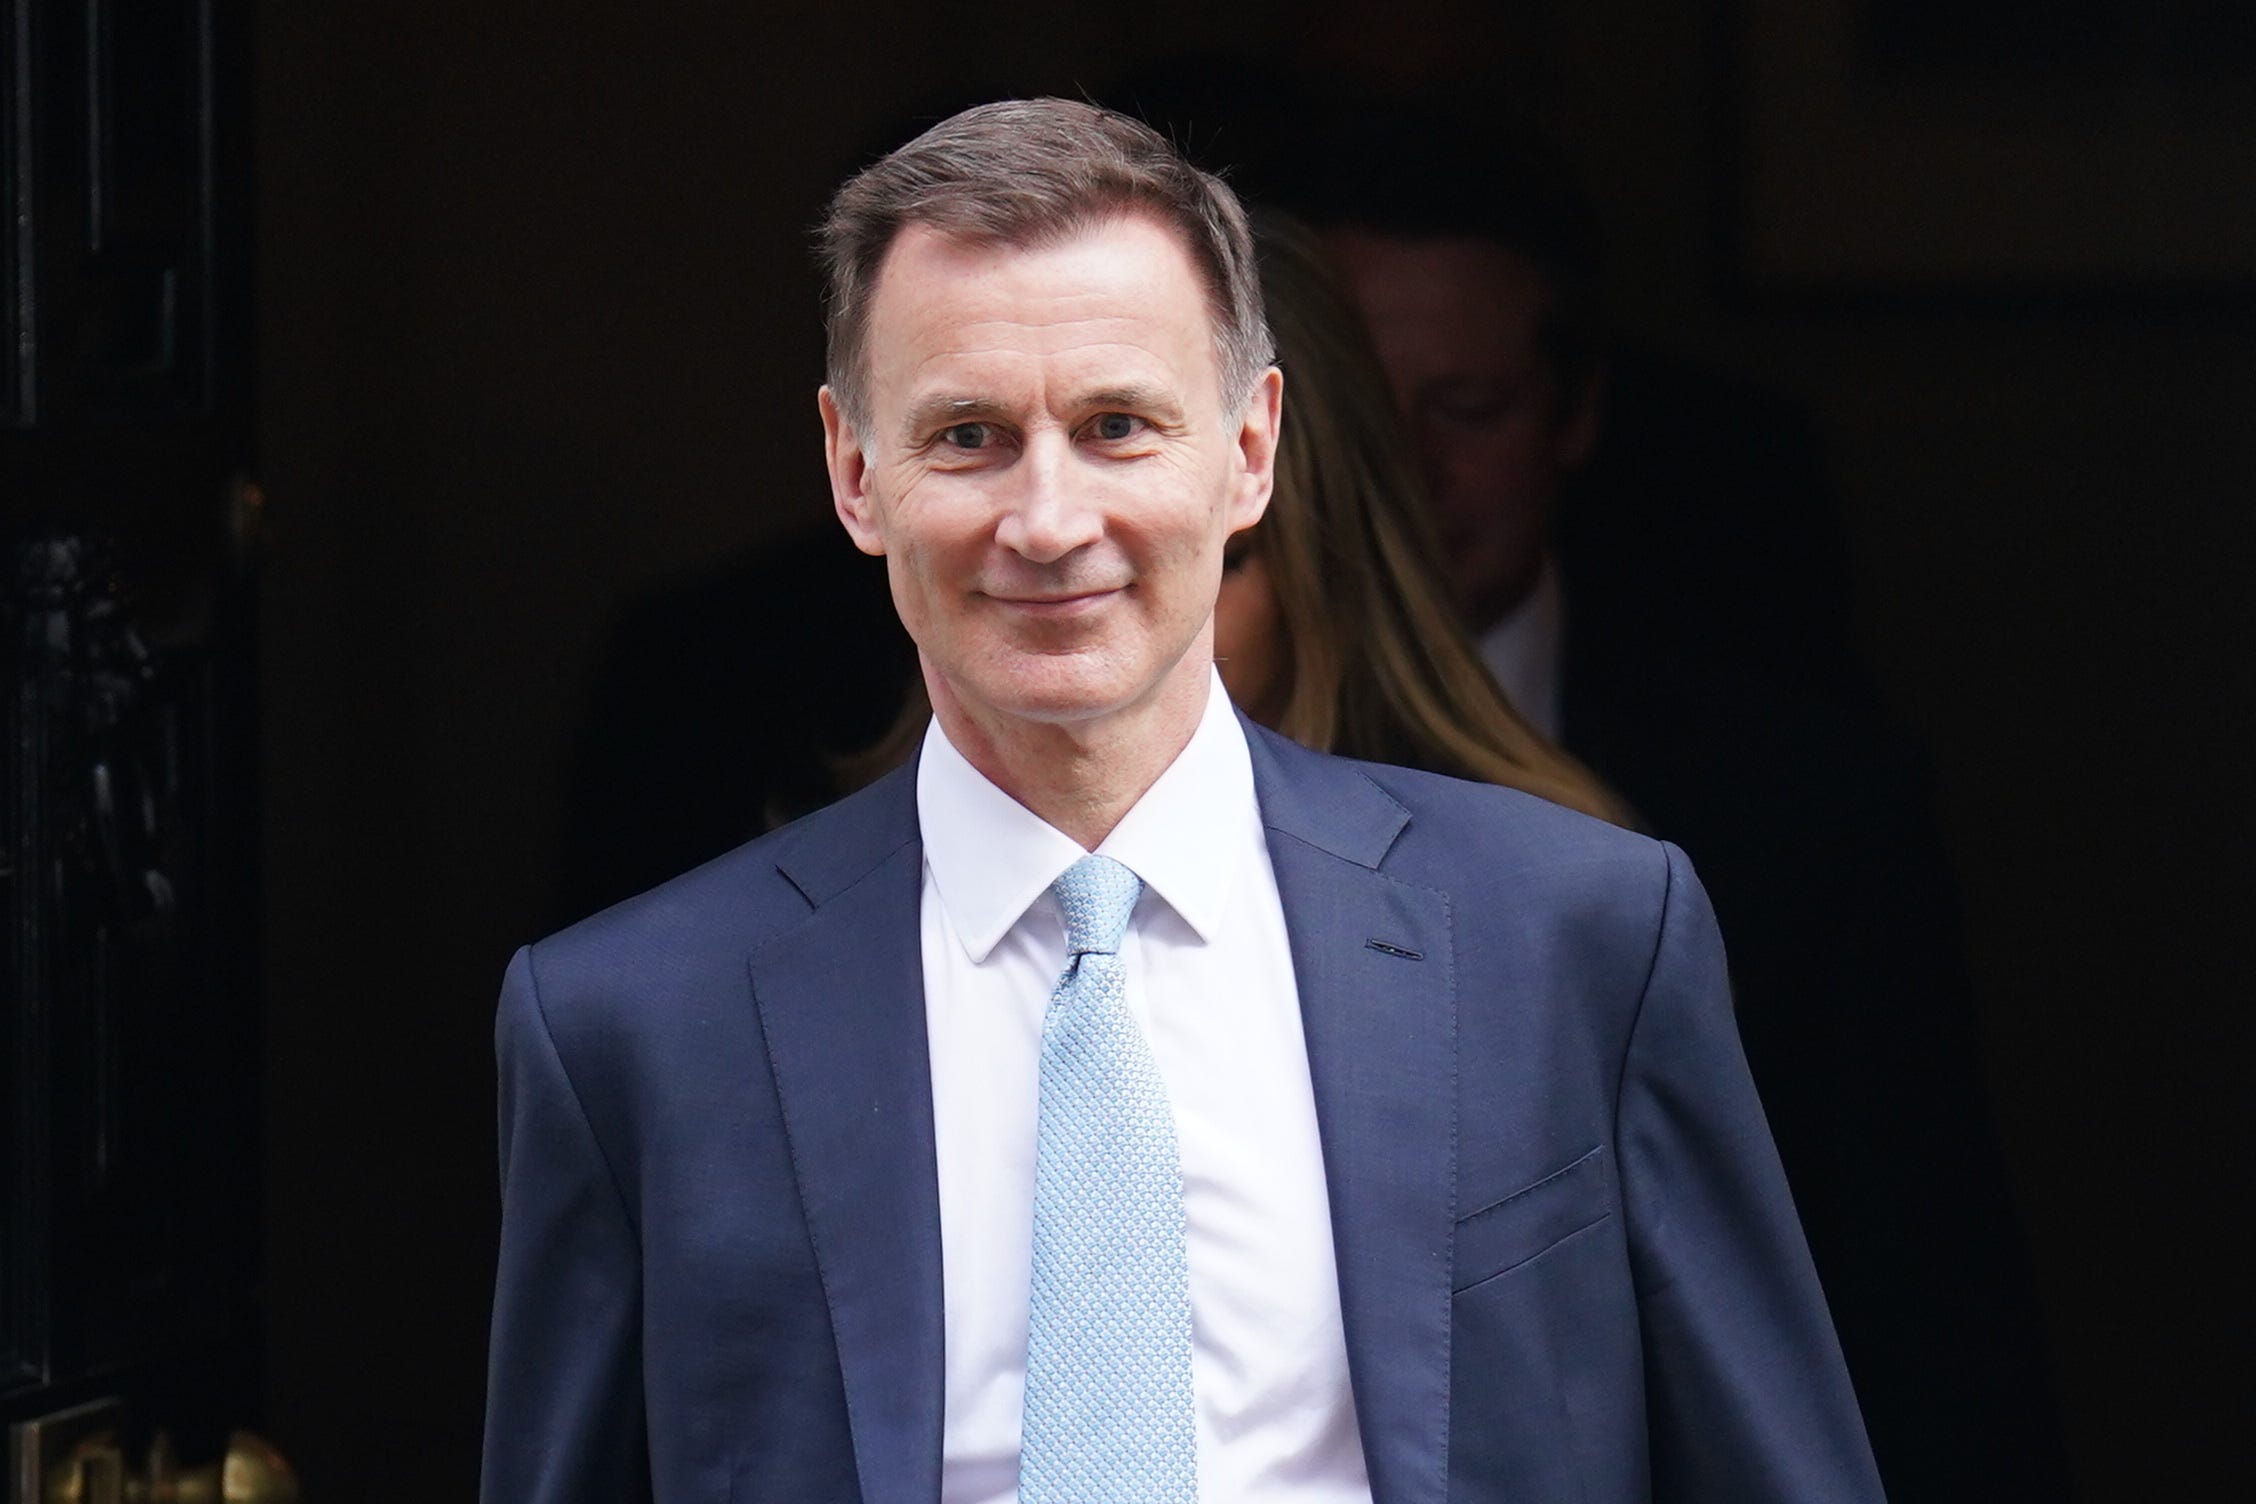 Jeremy Hunt has told of the promise he made to ensure a fair and full settlement during a meeting with campaigner Mike Dorricott in 2014